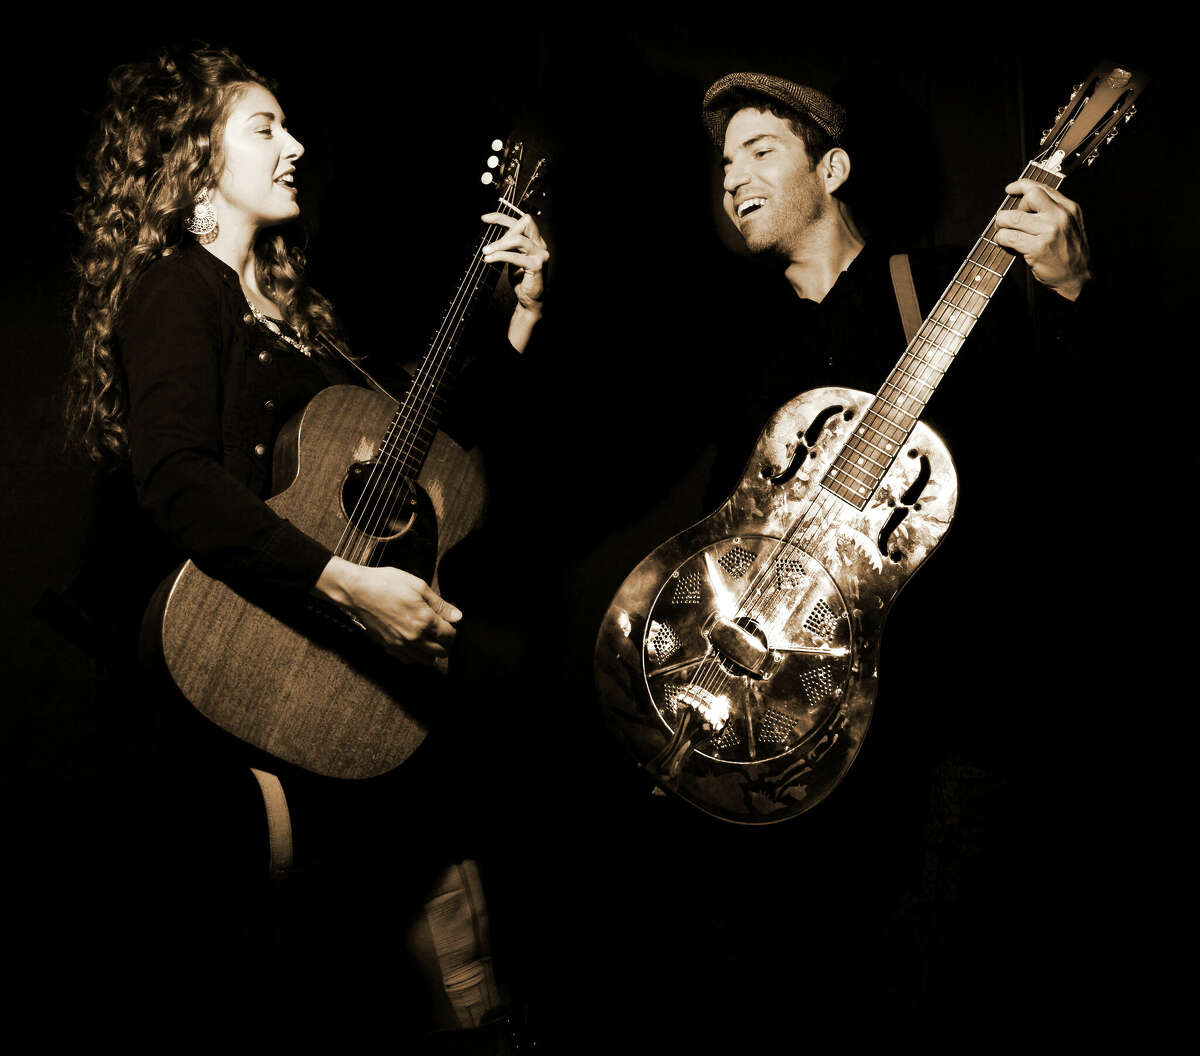 Fuzz and Carrie Sangiovanni created Caravan of Thieves in 2008.